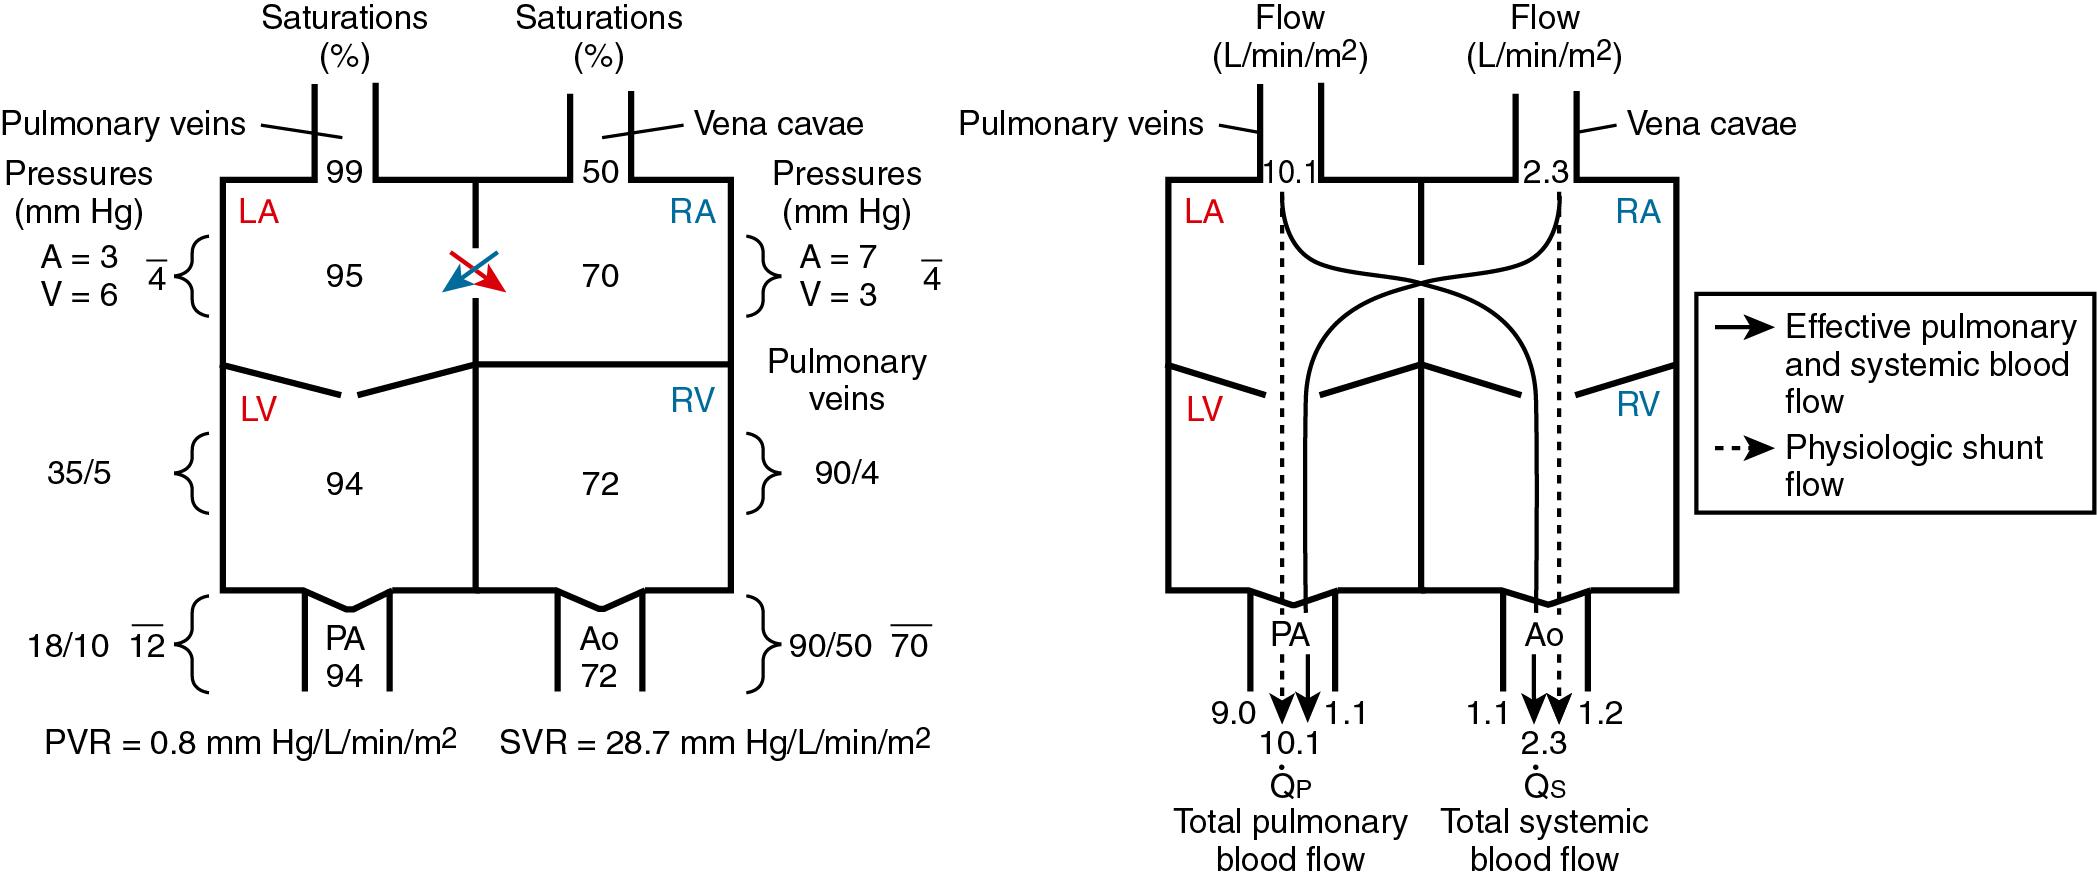 Fig. 30.3, Saturations, Pressures, and Blood Flows in Transposition of the Great Arteries With a Nonrestrictive Atrial Septal Defect and a Small Left Ventricular Outflow Tract Gradient.